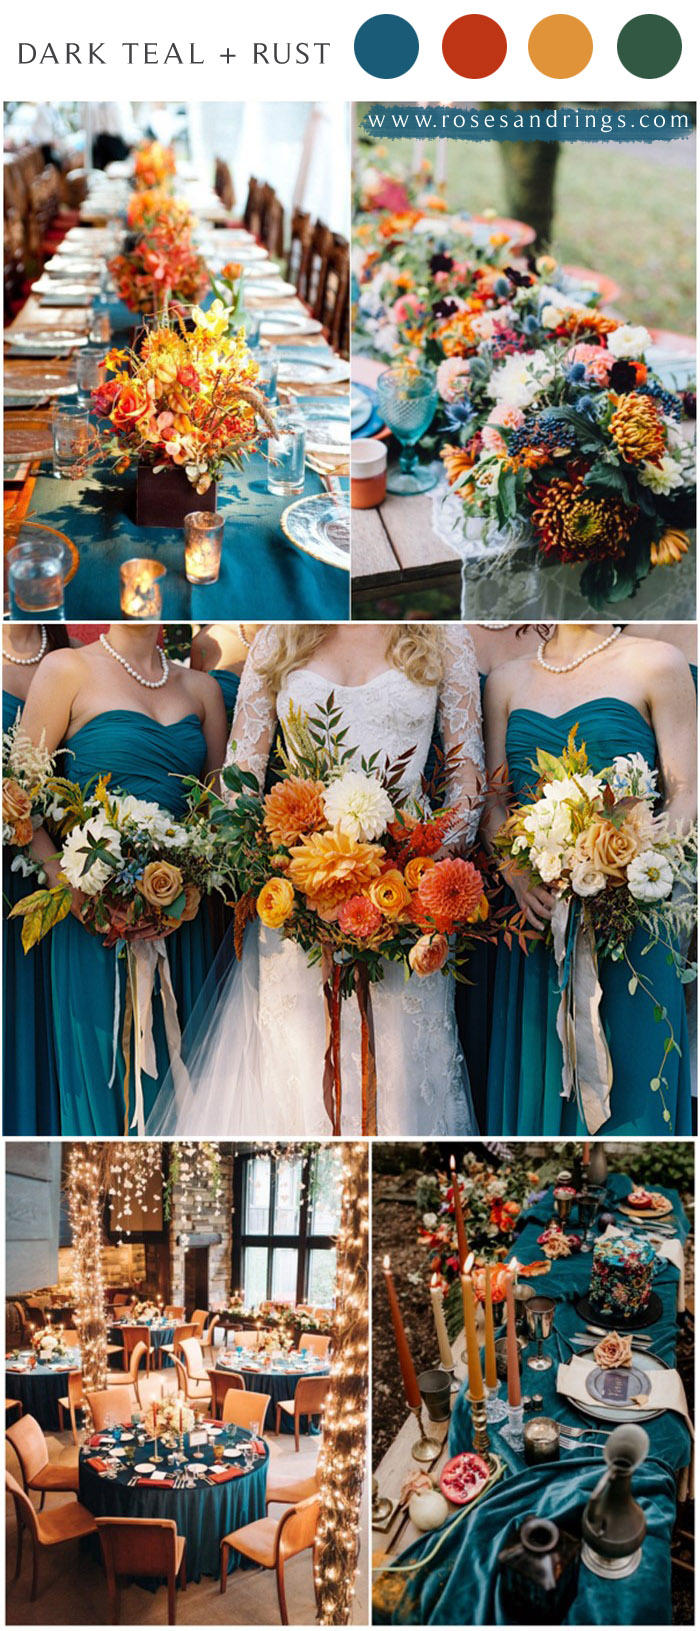 Dark Teal and Rust Fall Wedding Color Ideas for 2021 